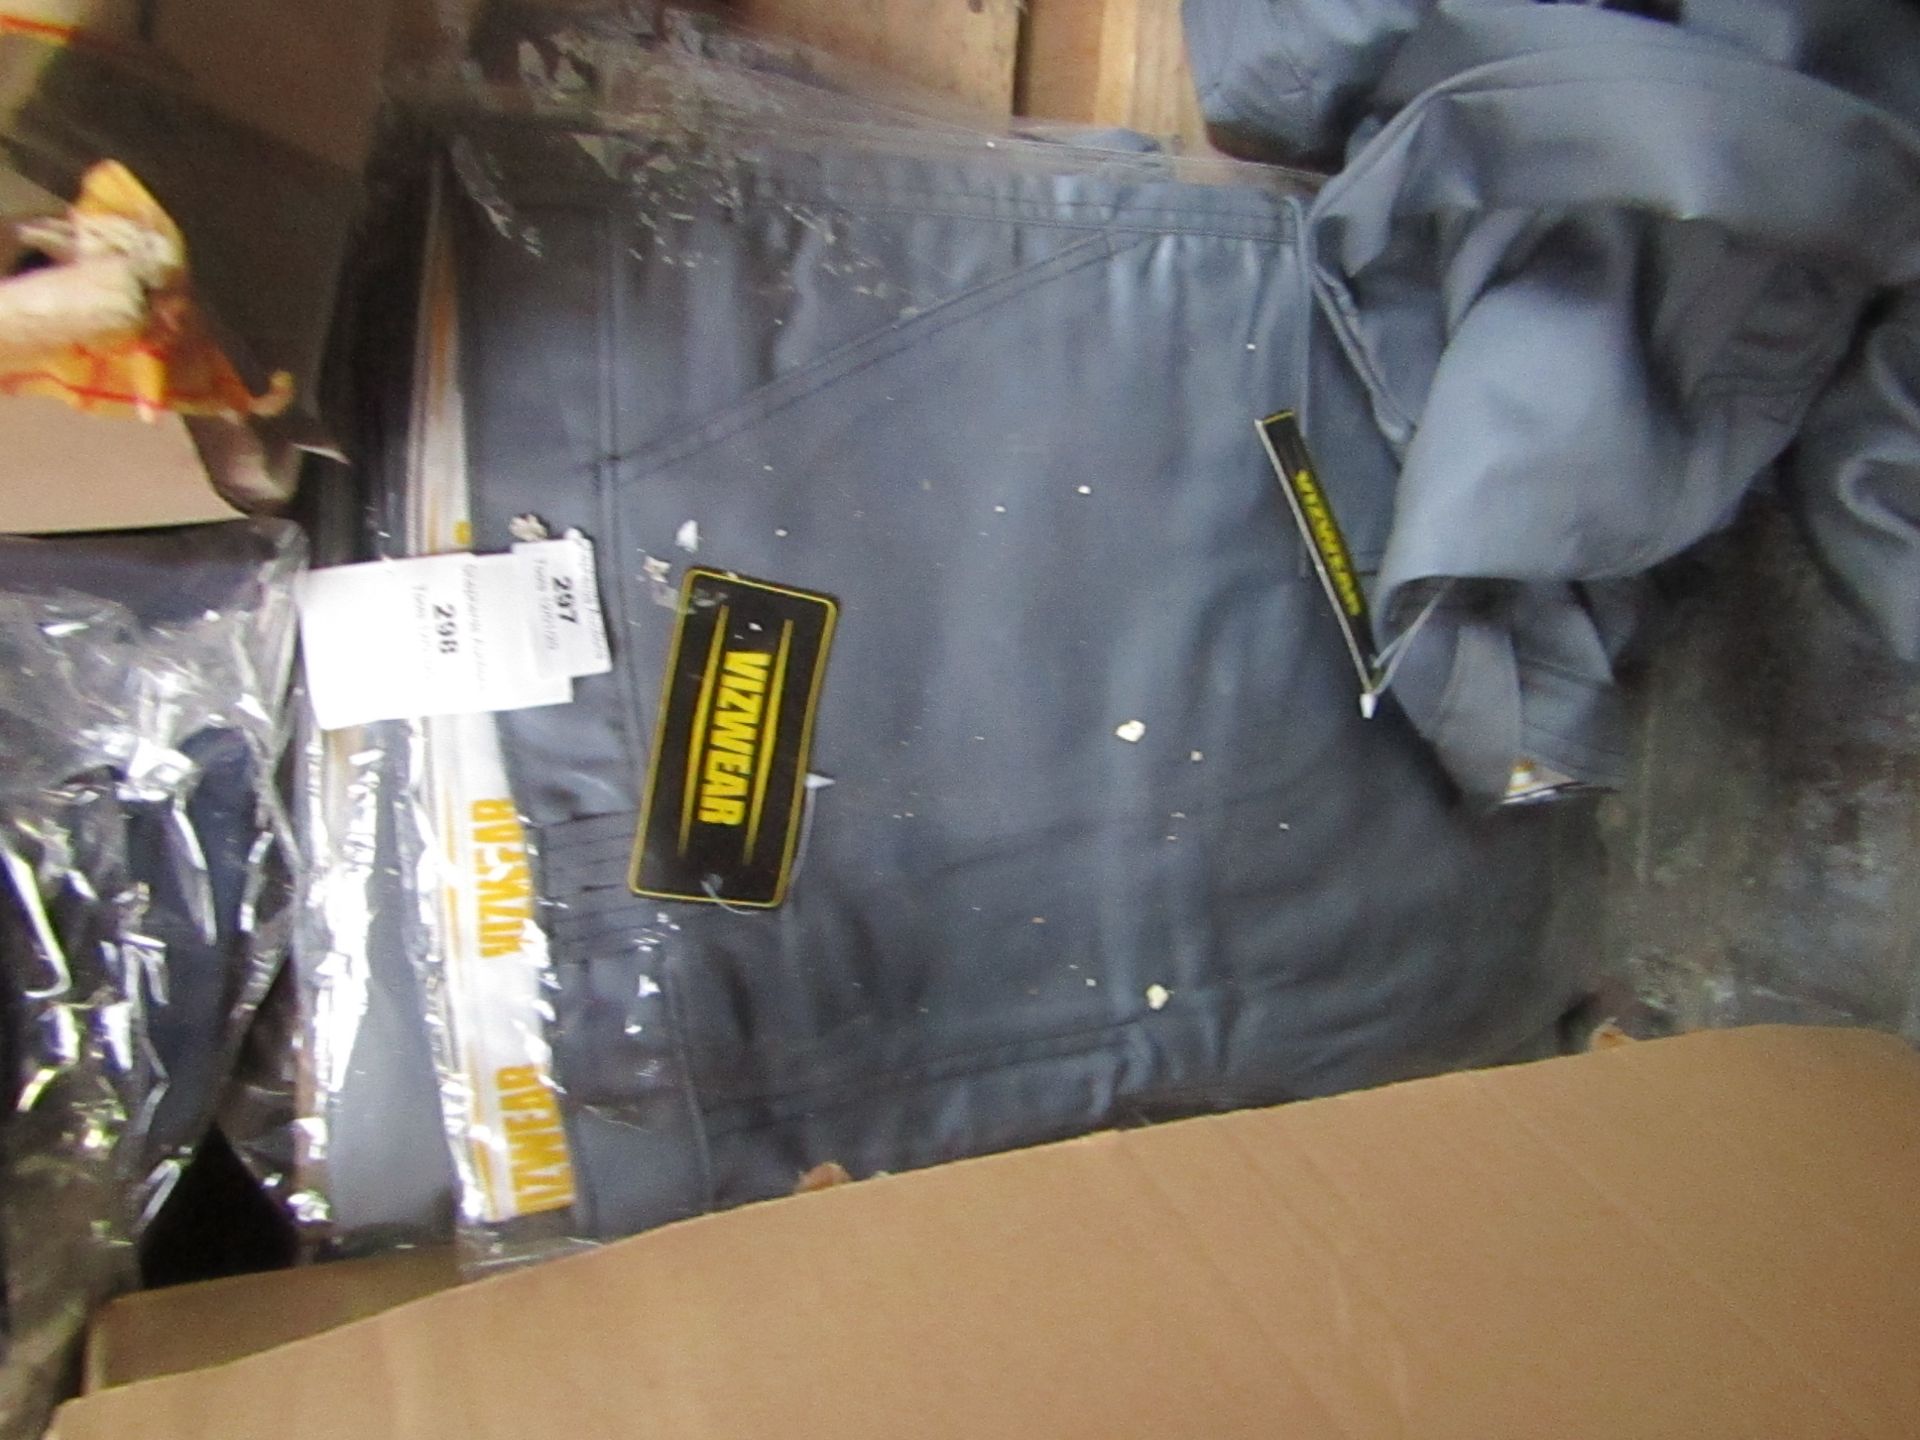 2 x Vizwear action line trousers, size 46R, new and packaged.